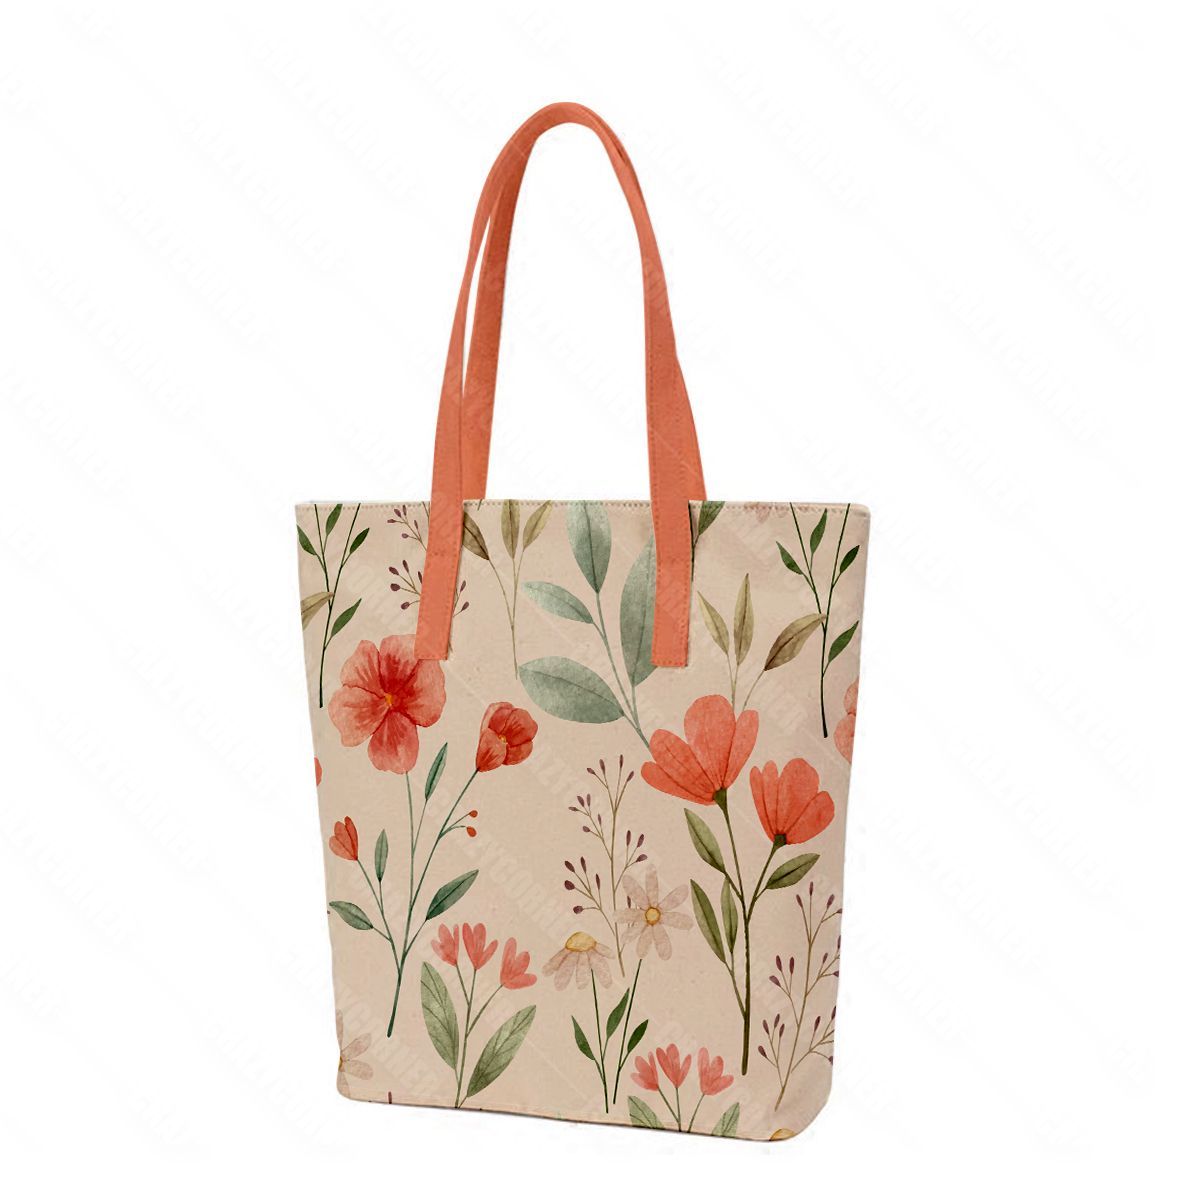 Personalized Canvas Tote Bag Printing | High Quality & Low Price